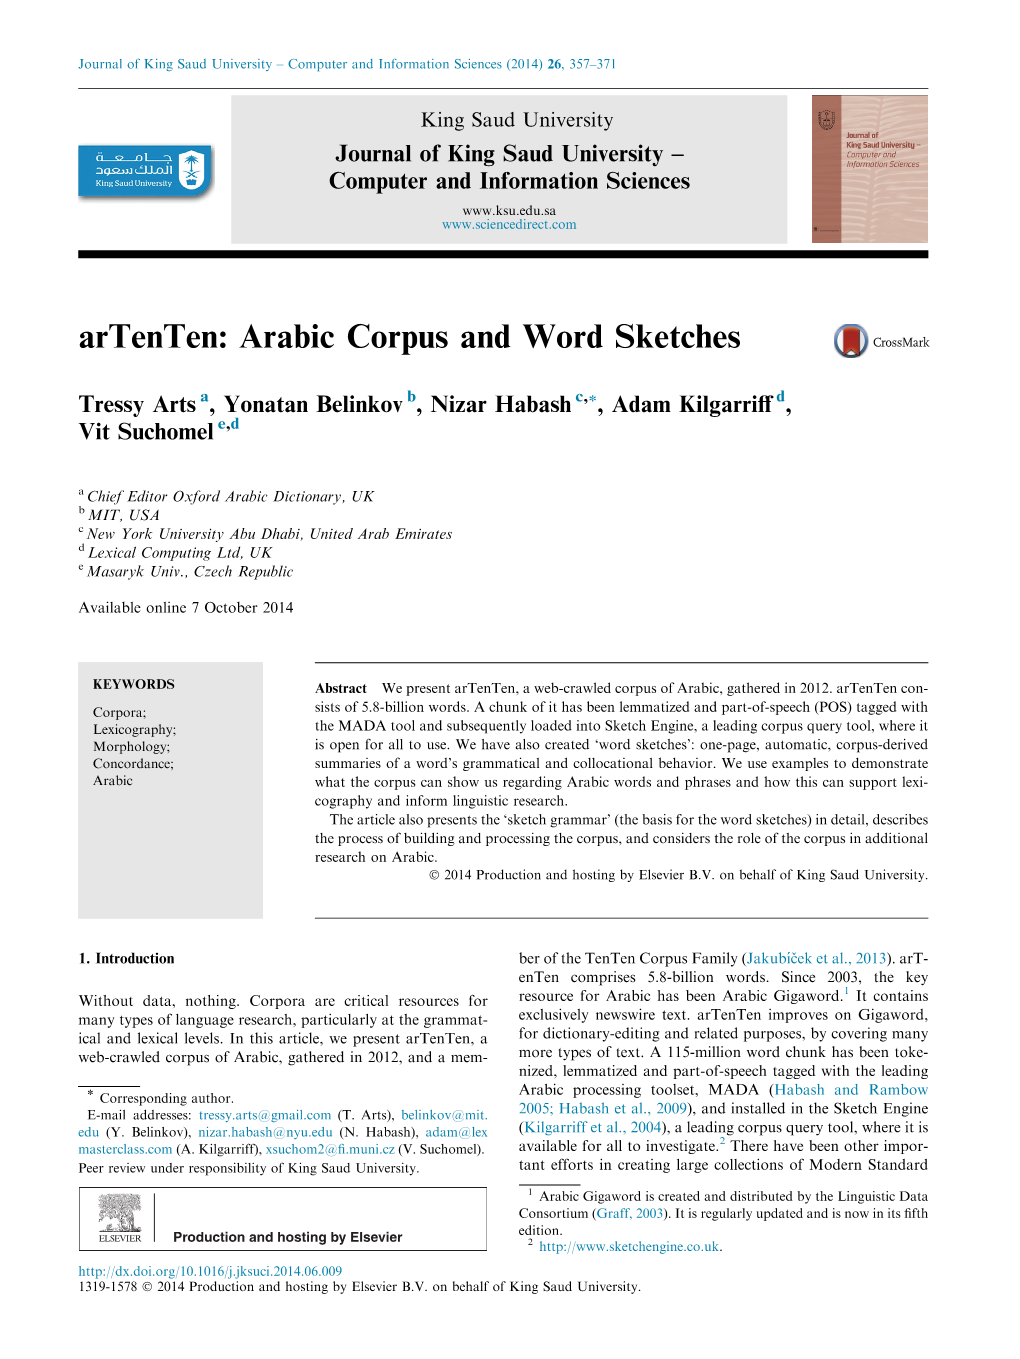 Arabic Corpus and Word Sketches